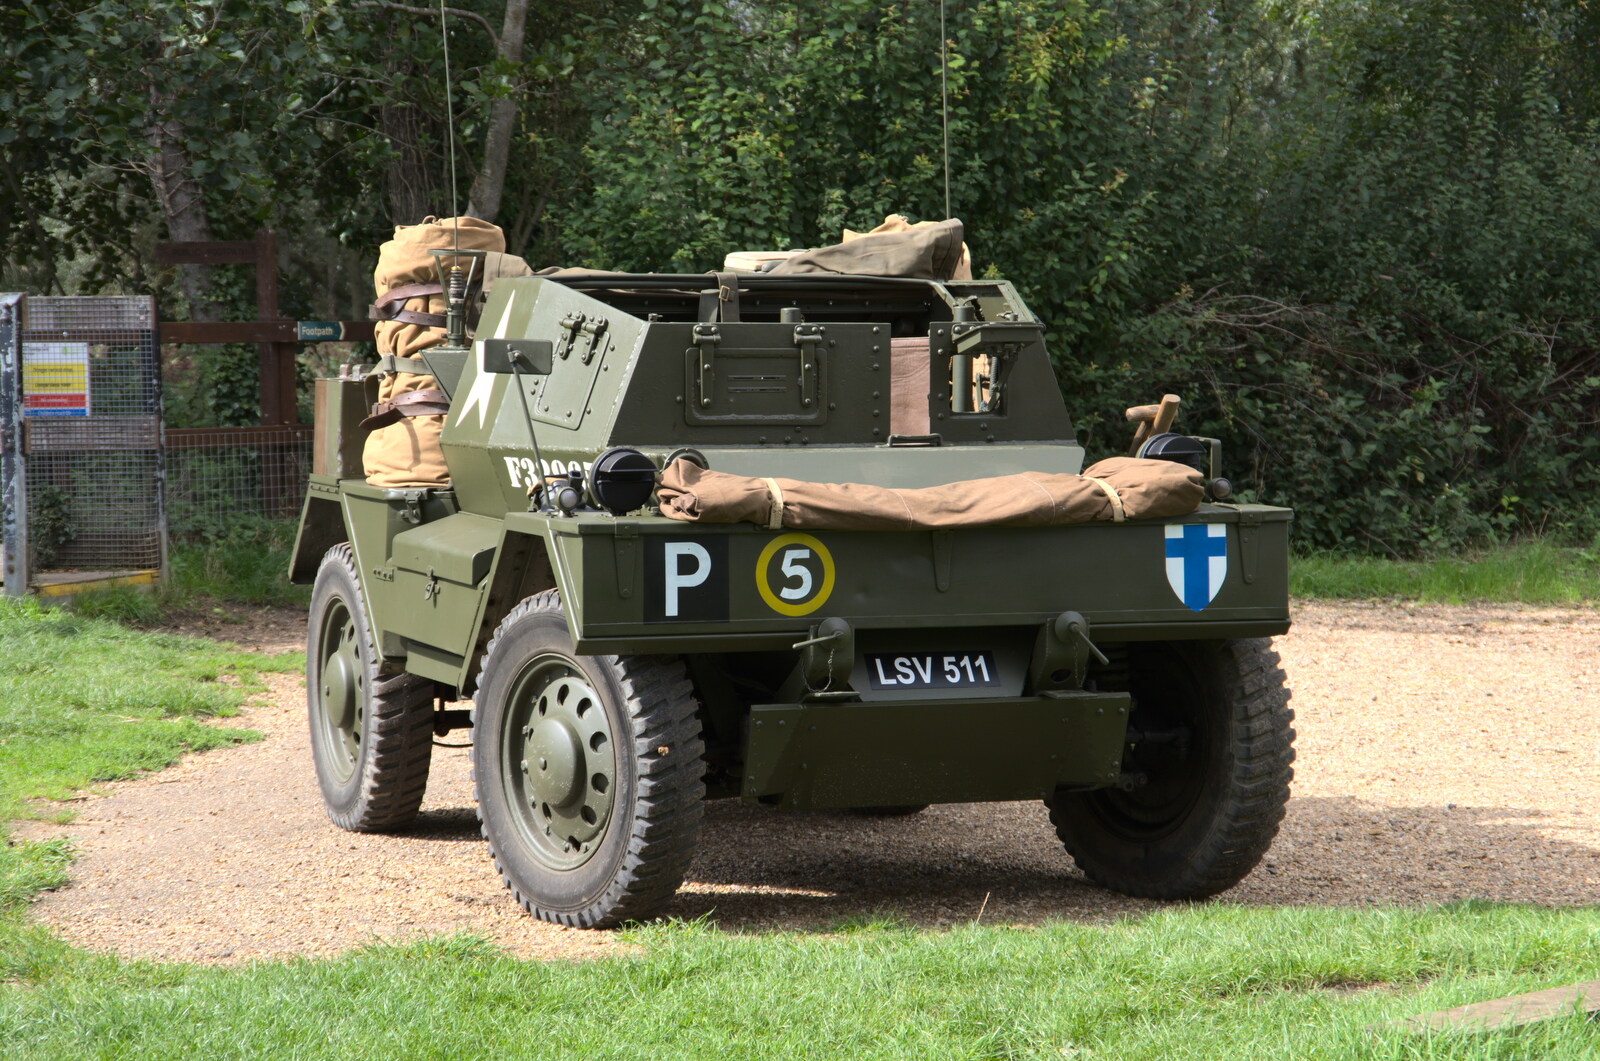 Camping at Three Rivers, Geldeston, Norfolk - 5th September 2020: There's a US army vehicle in the car park